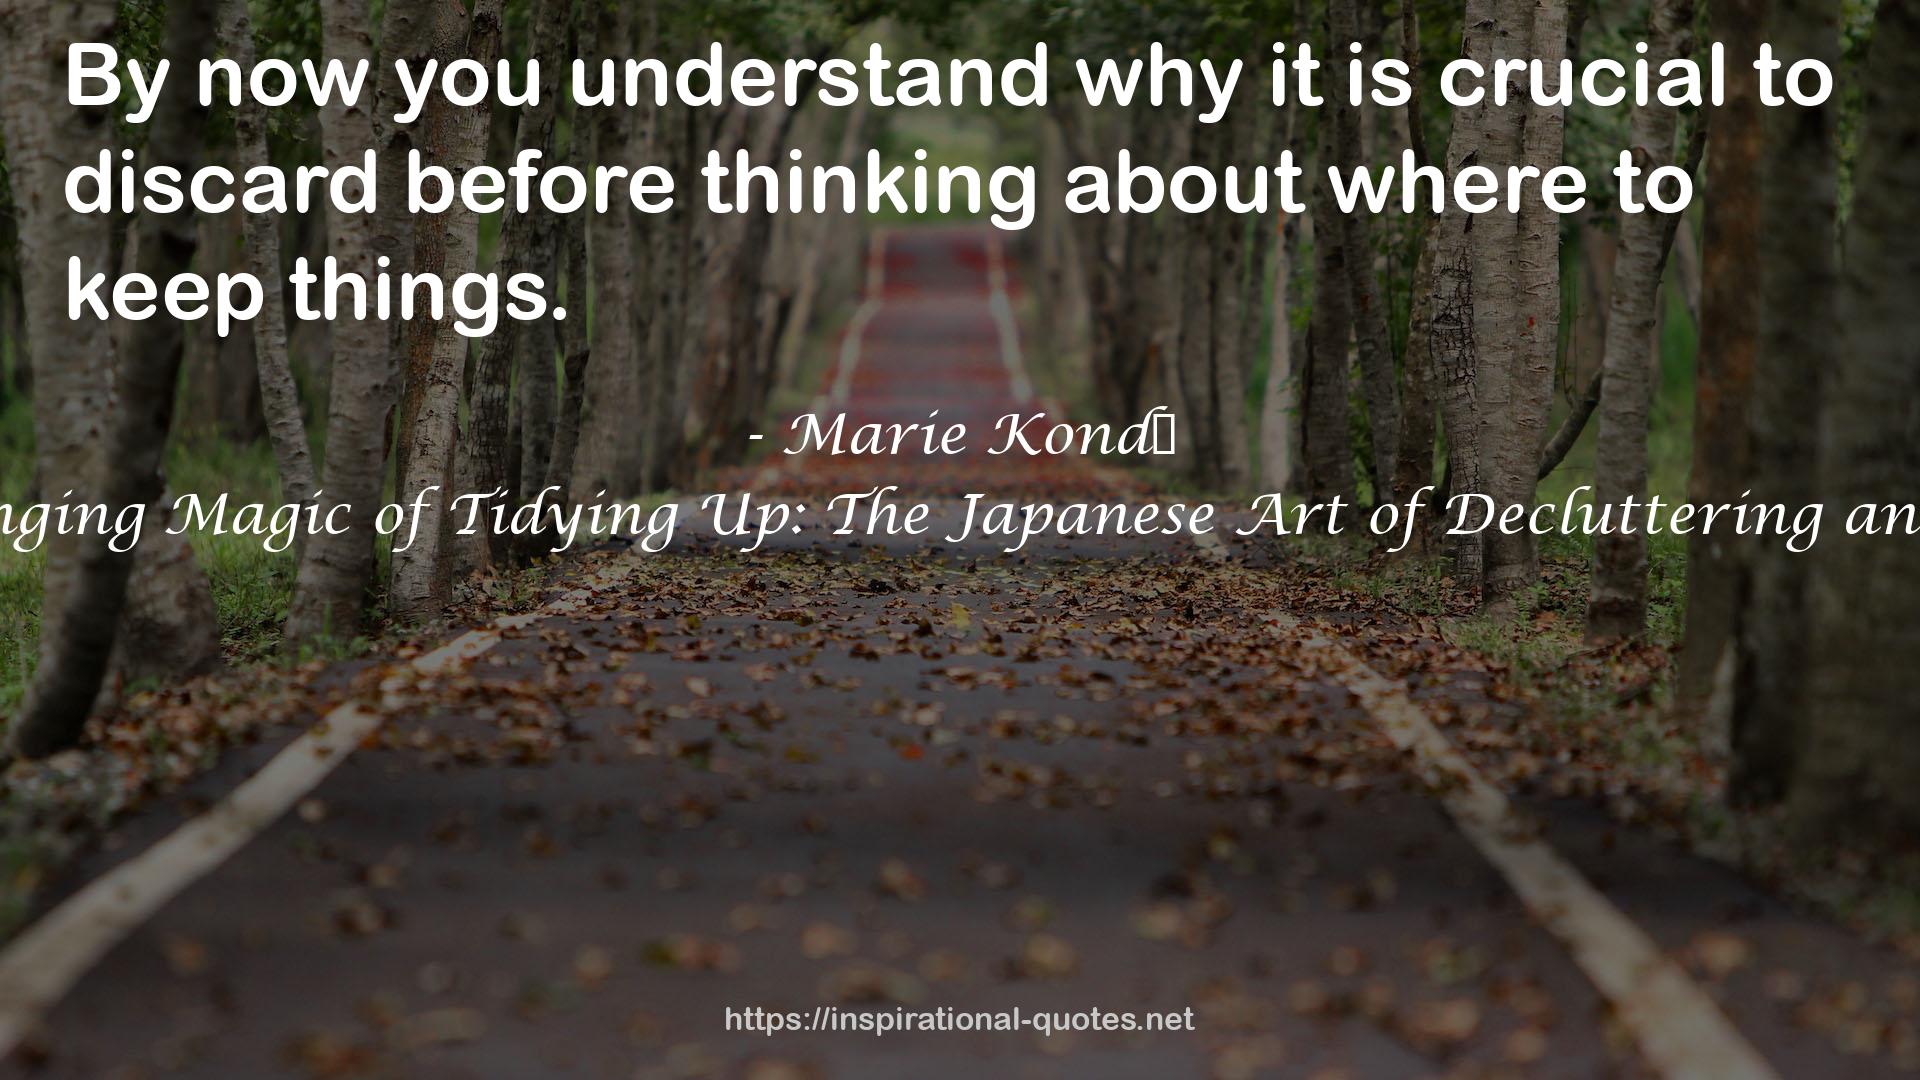 The Life-Changing Magic of Tidying Up: The Japanese Art of Decluttering and Organizing QUOTES